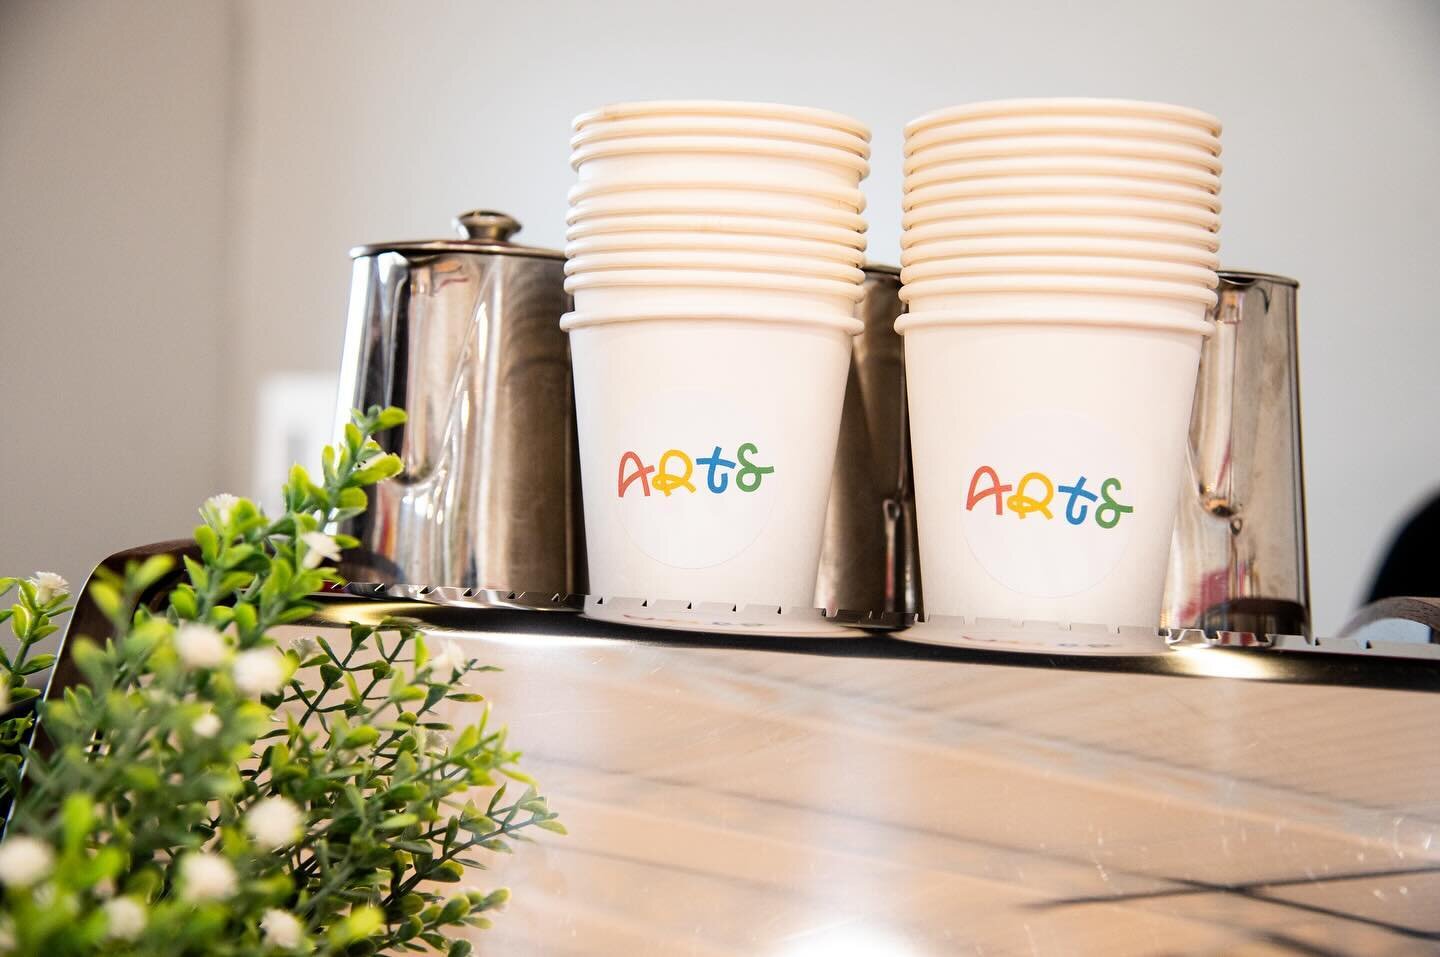 Need custom cup labels for your event? The little details elevate any event to a much higher level of guest experience. 

Make your event memorable with a coffee cart + and be sure to add those extra custom details! 

Let us know how we can help! Fro